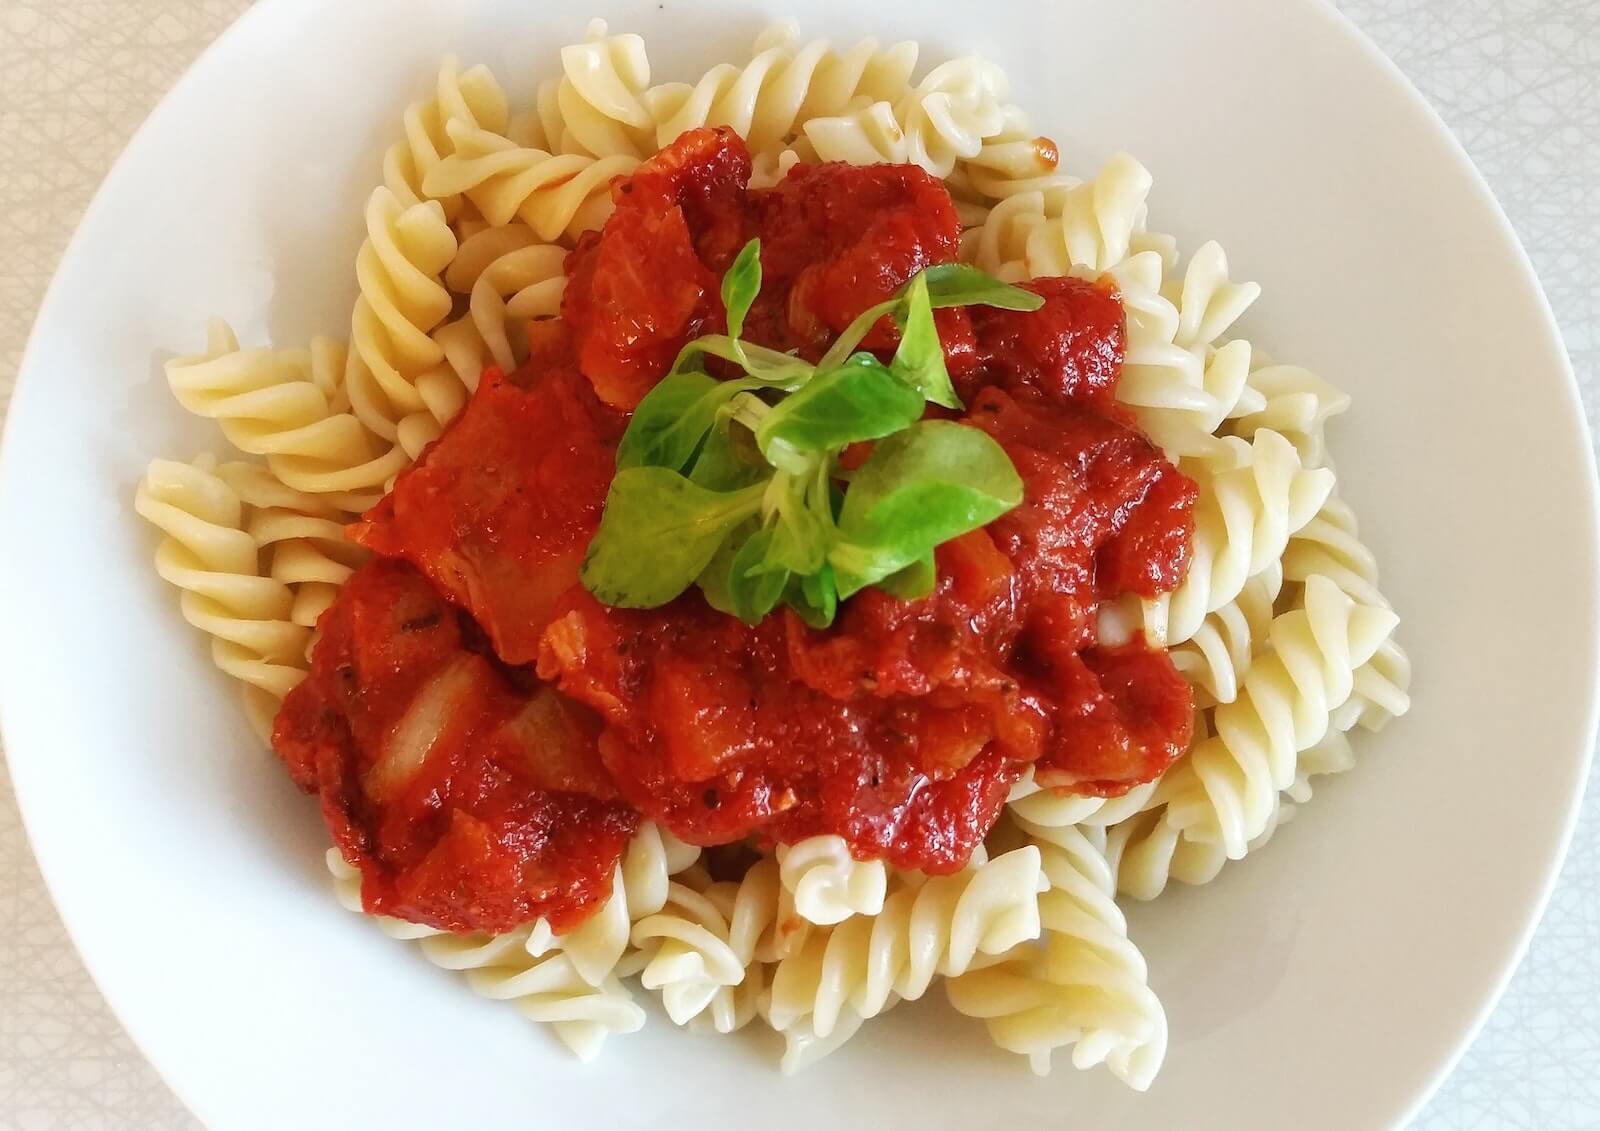 Pasta With Sauce on the Plate